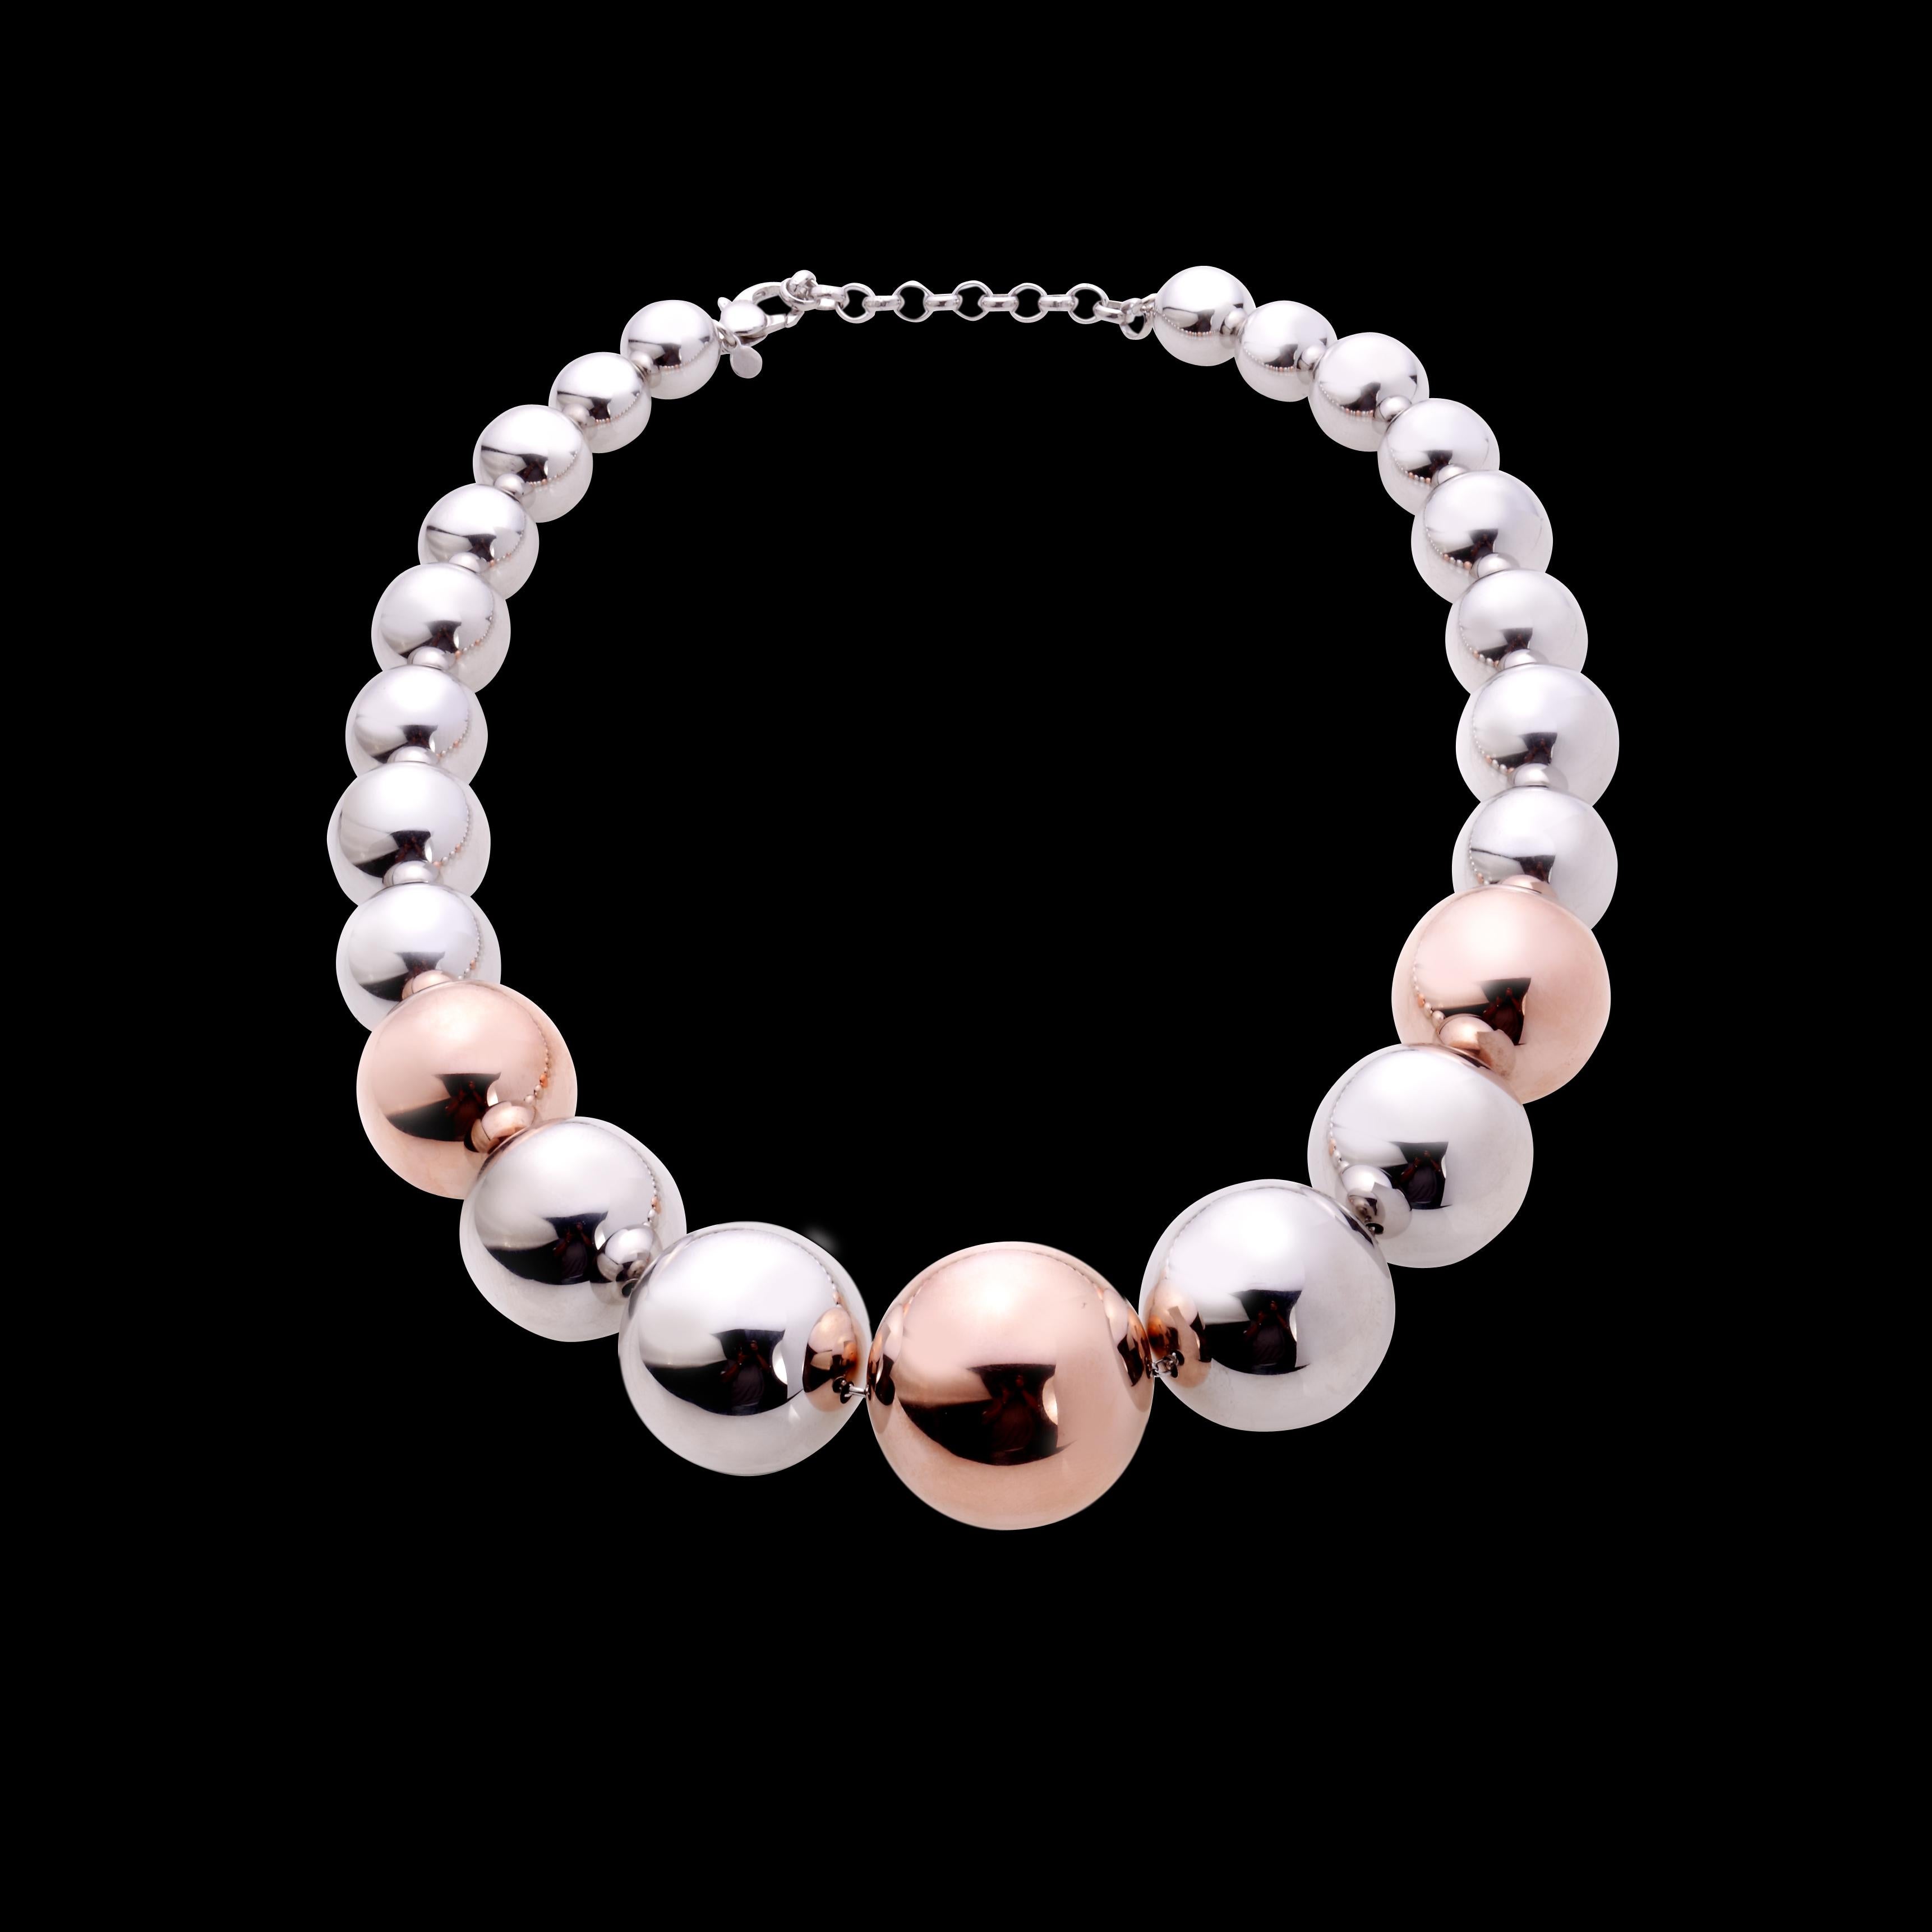 This necklace is made in sterling silver .Three of the pieces are copper-plated, creating a very special colour contrast.
This item is also available without the copper-plated silver, in all-silver.
The length is ajustable by a piece of chain that